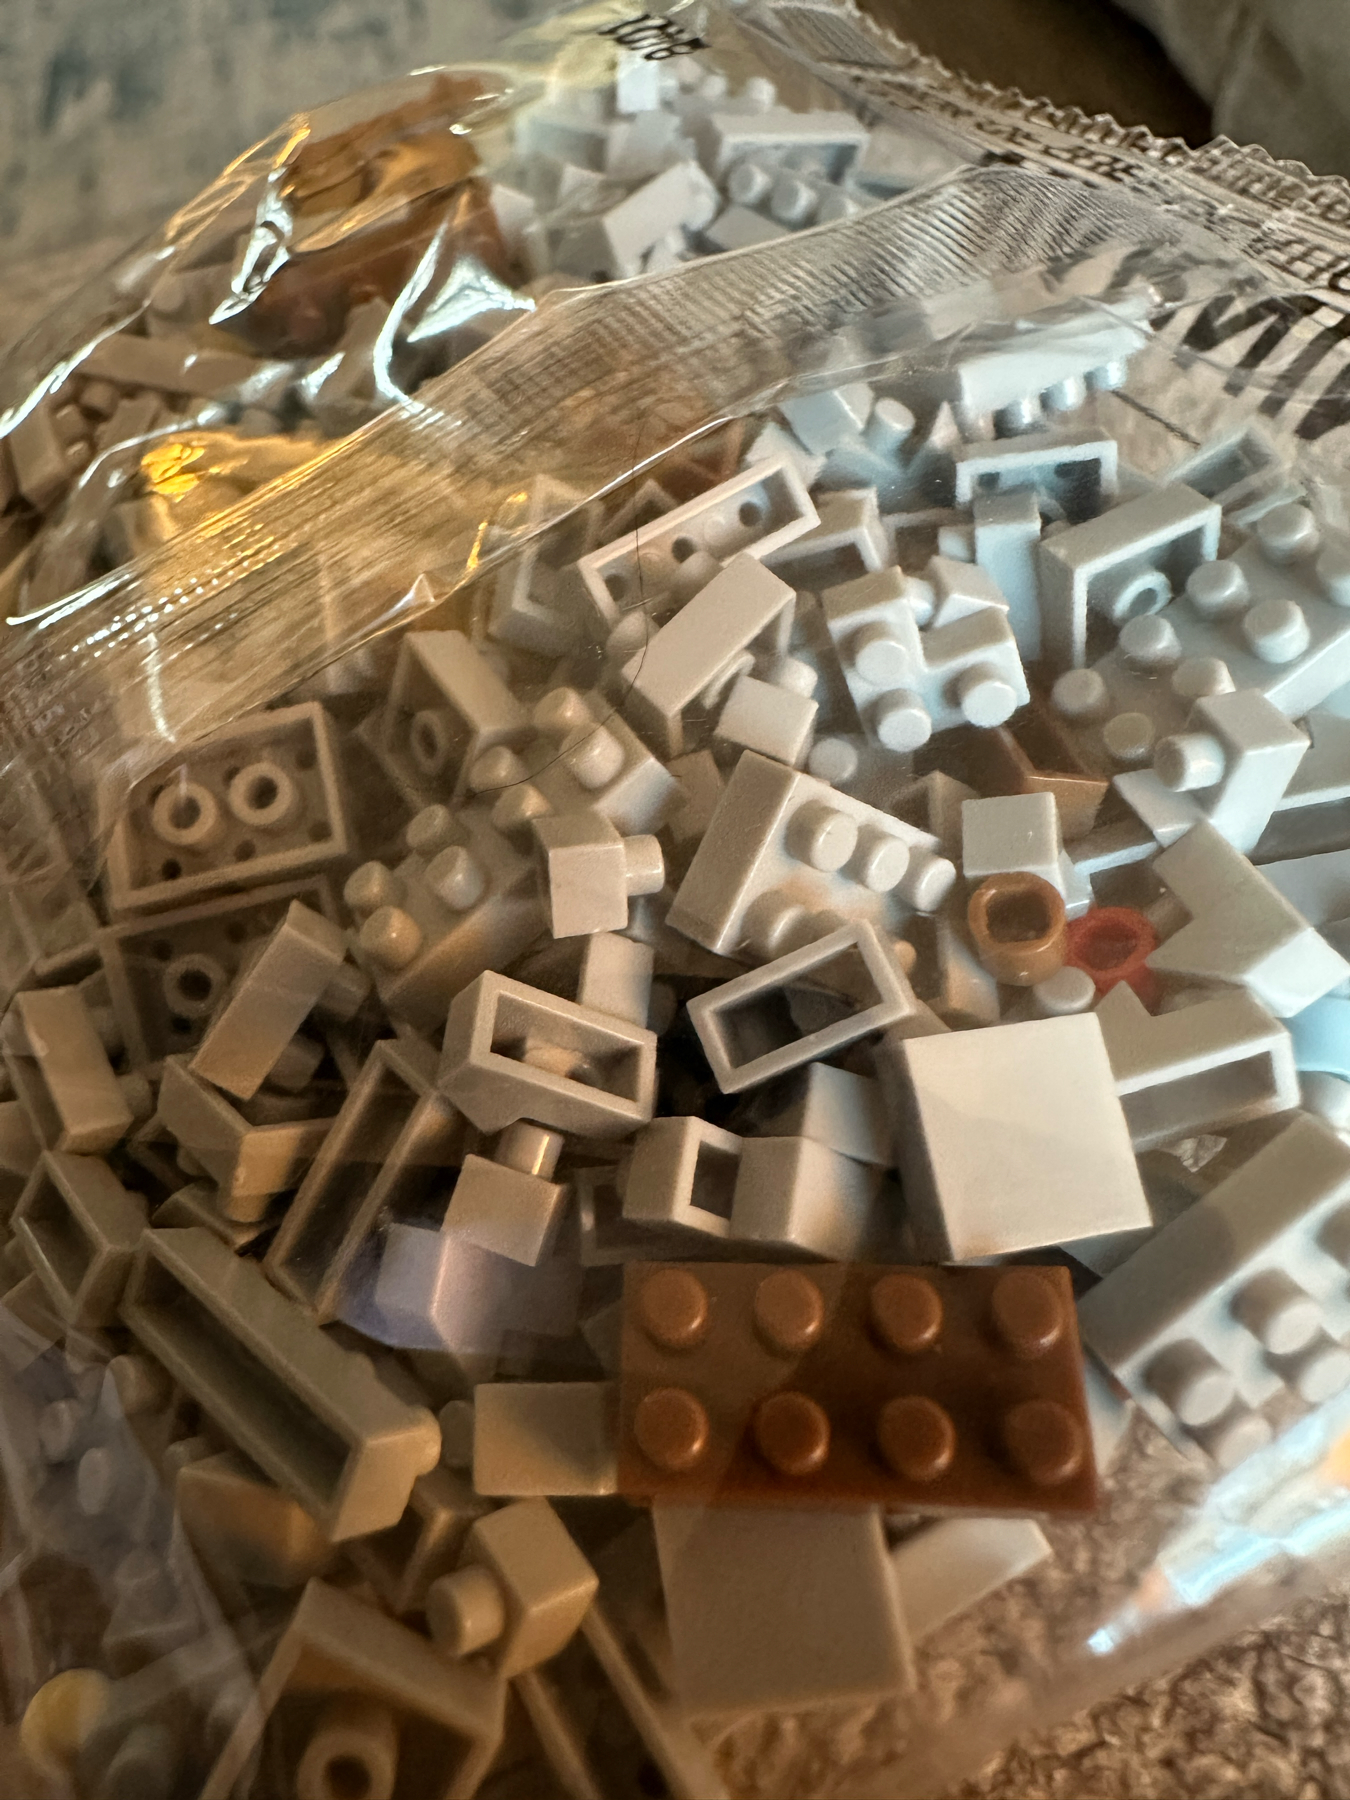 A bag of assorted LEGO bricks in various shapes and sizes, predominantly in different shades of gray and white, with a single brown brick visible.